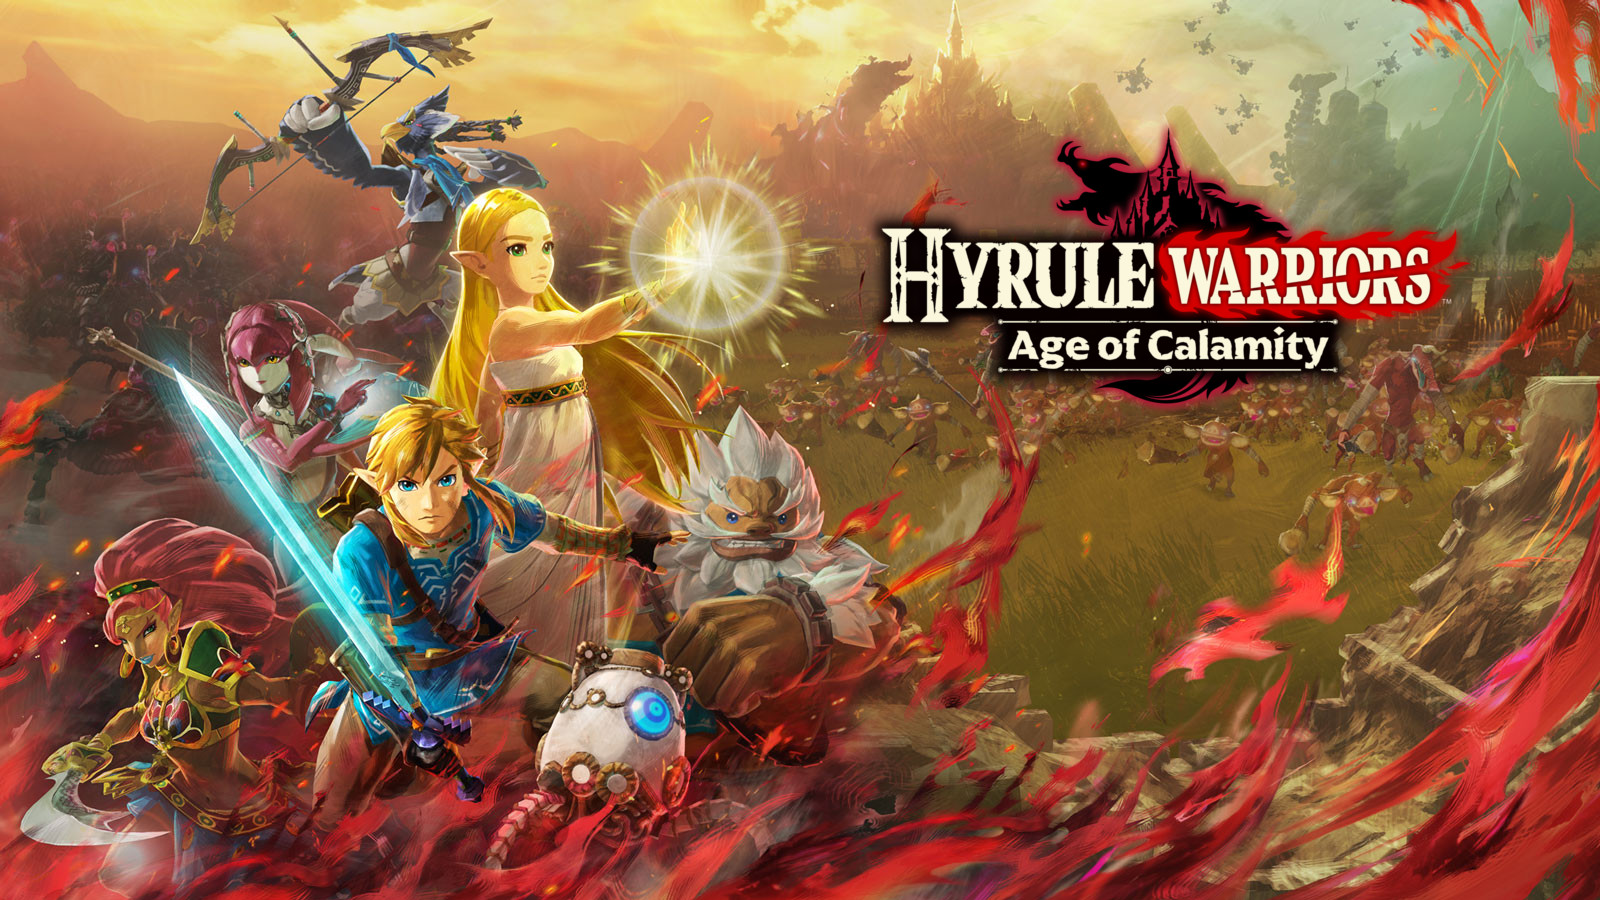 Hyrule Warriors: Age of Calamity Revealed - Coming November 20th, 2020